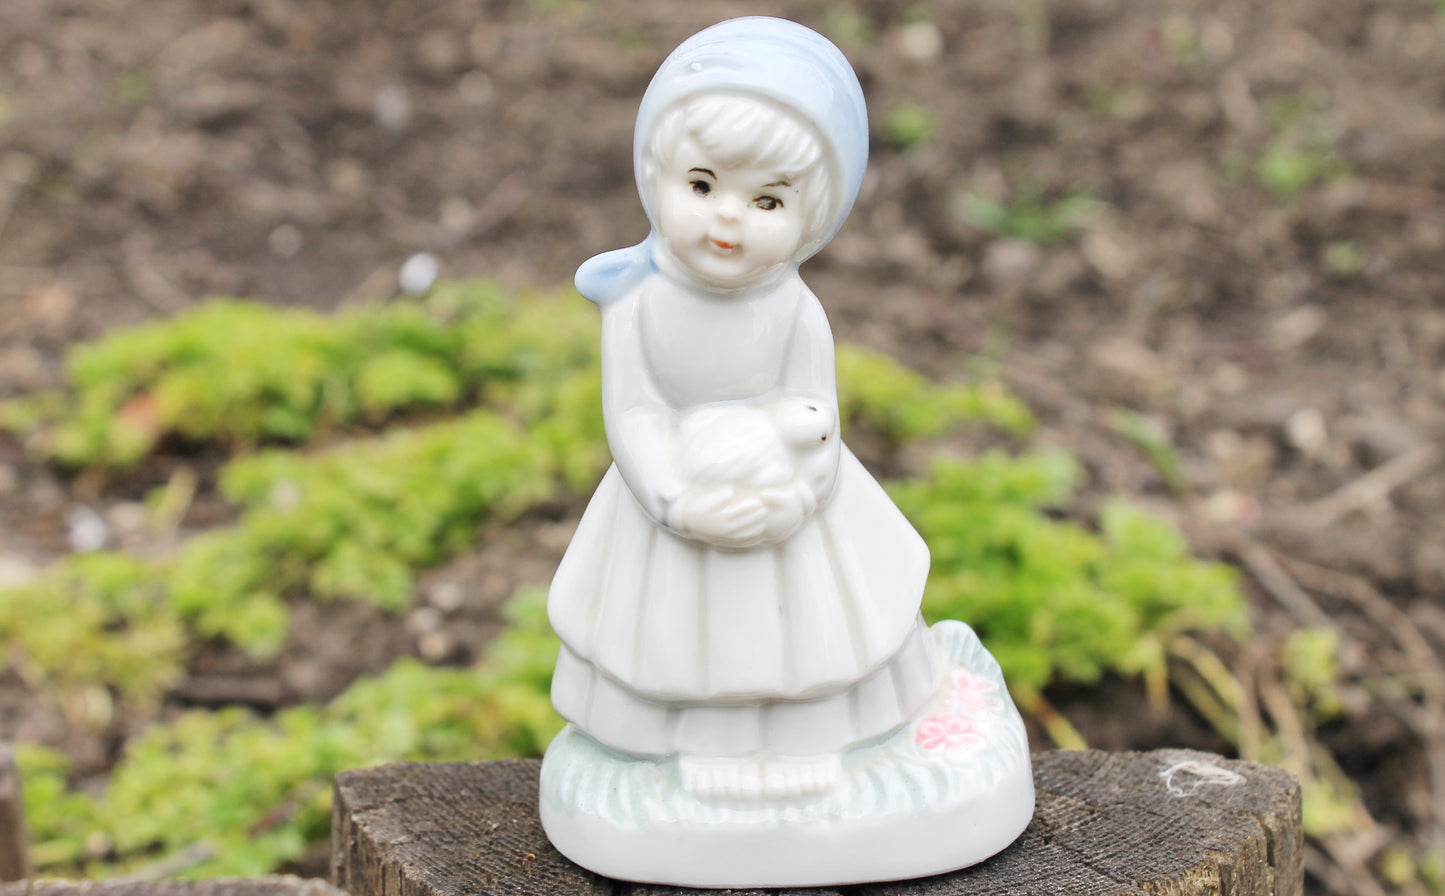 Vintage Porcelain girl with a pet 4.3 inches - Germany porcelain figurine - vintage decor - Germany vintage - later 1980s